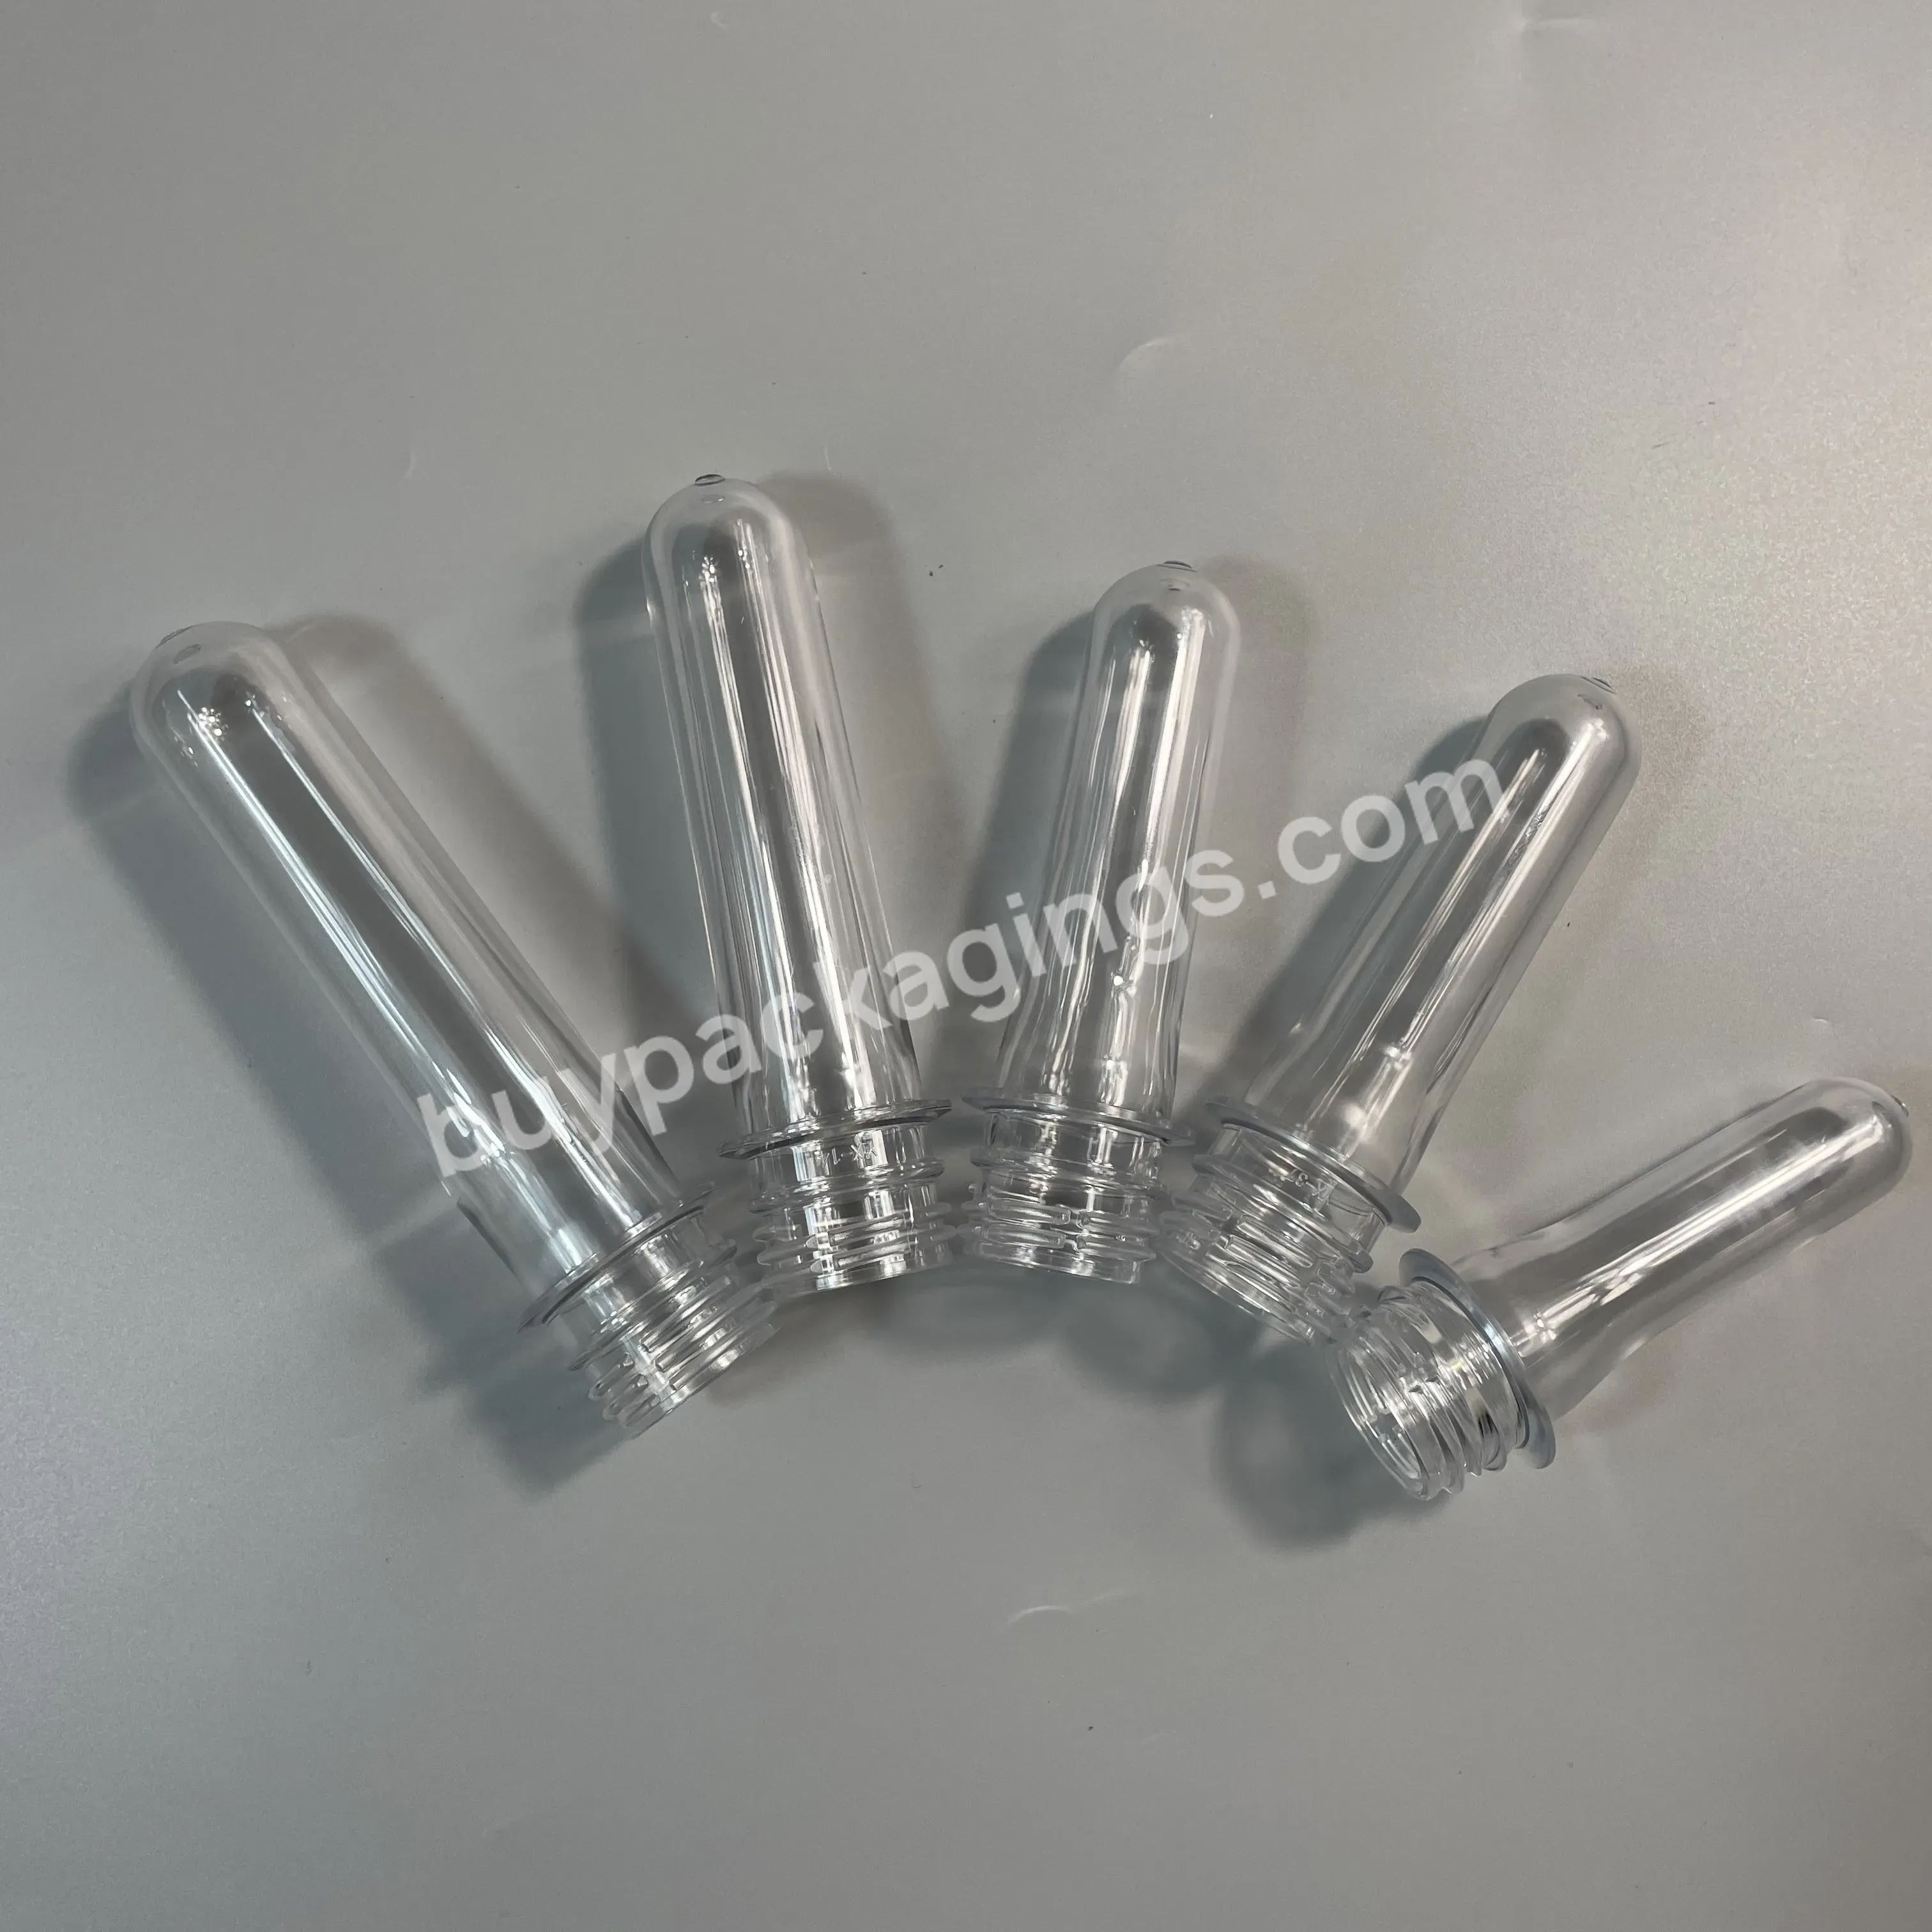 Professional Chinese Pco1880 Pet Pco Neck 14g 20g 22g 25g 28g 36g 38g Pet Preform For Water Bottle - Buy 28mm Pet Preform For Bottle With 100% New Material,Pet Bottle Preform Tube Multi-specification And Multi-gram Weight In Stock,Pet Water Bottle Pr